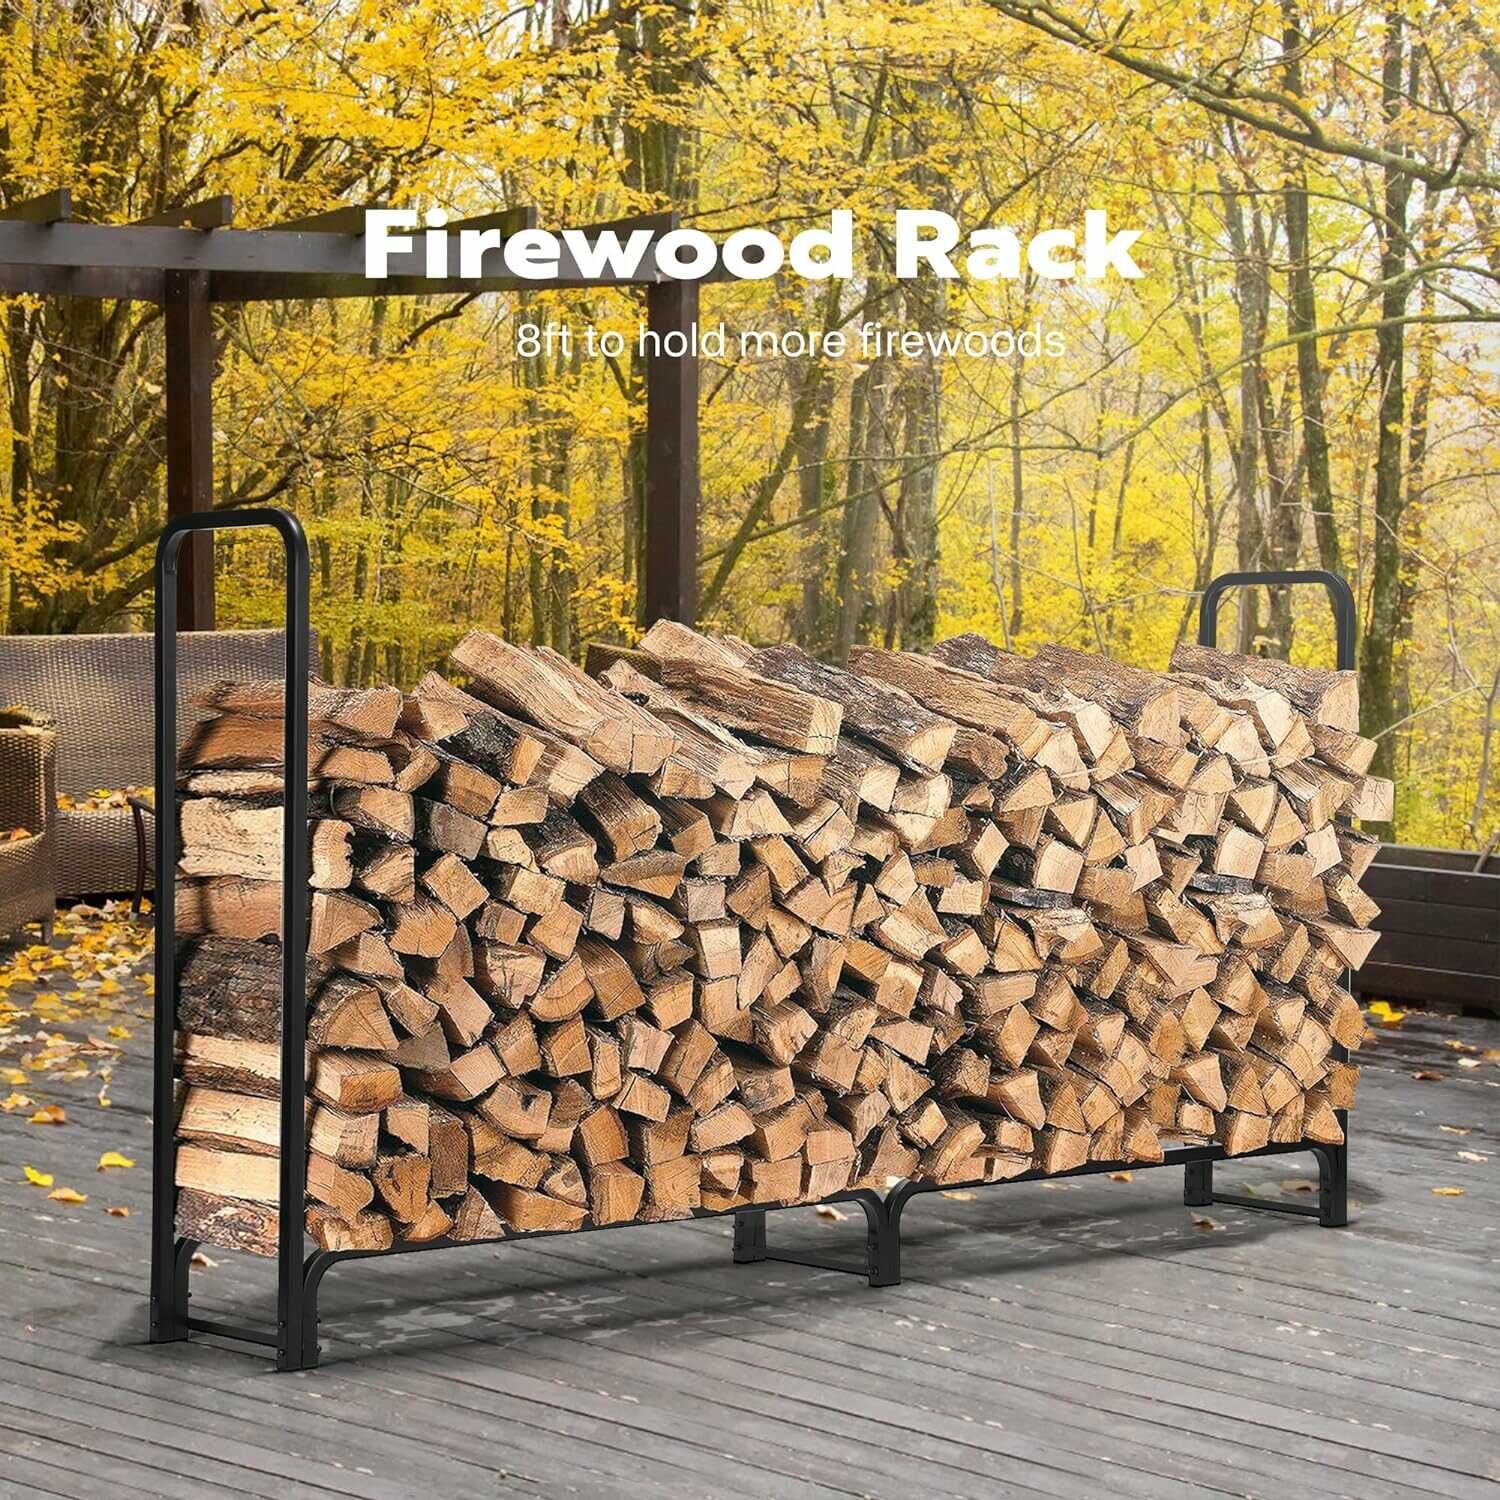 GREEN PARTY Firewood Rack 20 Inch Indoor/Outdoor Firewood Holder, Log Rack  Wood Holder for Fireplace, Kindling Wood Storage and Wood Stove